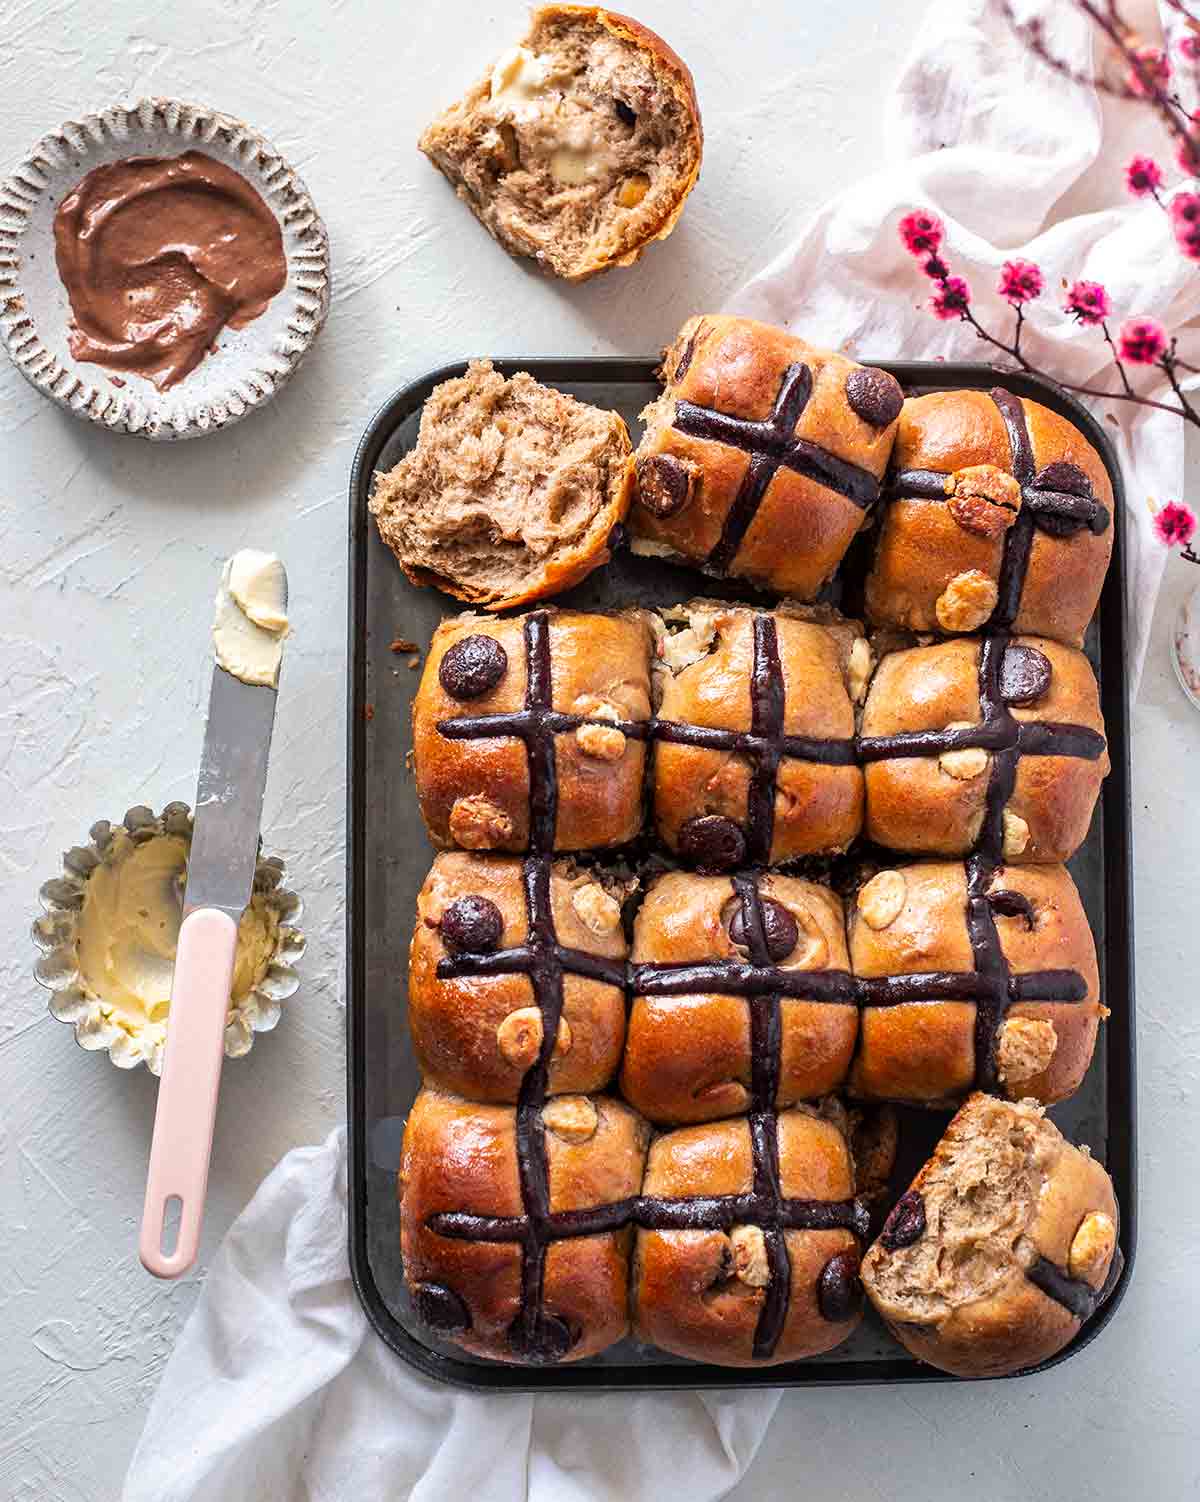 Double chocolate chip hot cross buns on baking tray. One hot cross bun is cut open and has butter spread on one side. 